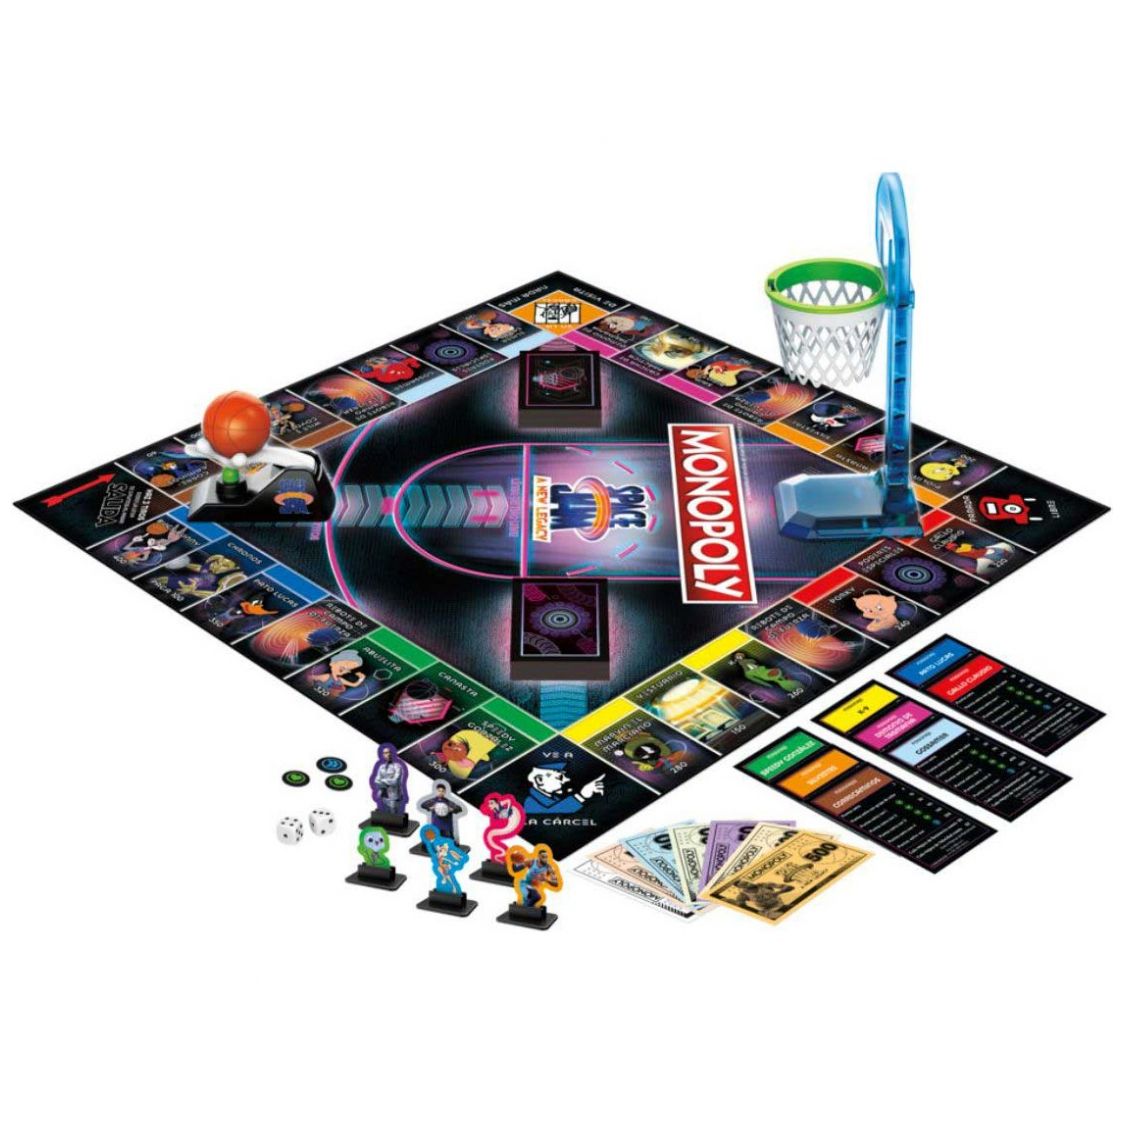 Monopoly: Space Jam a New Legacy